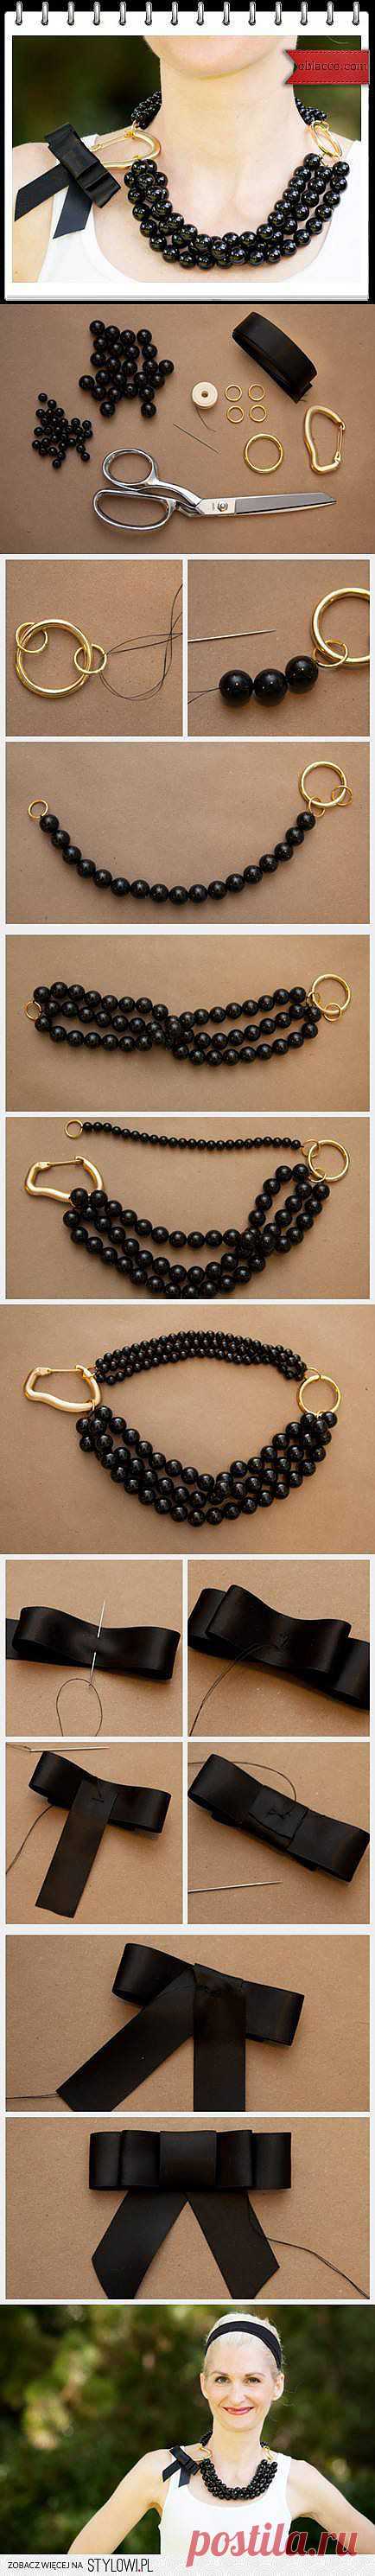 DIY Necklace of Beads DIY Projects | UsefulDIY.com na Stylowi.pl